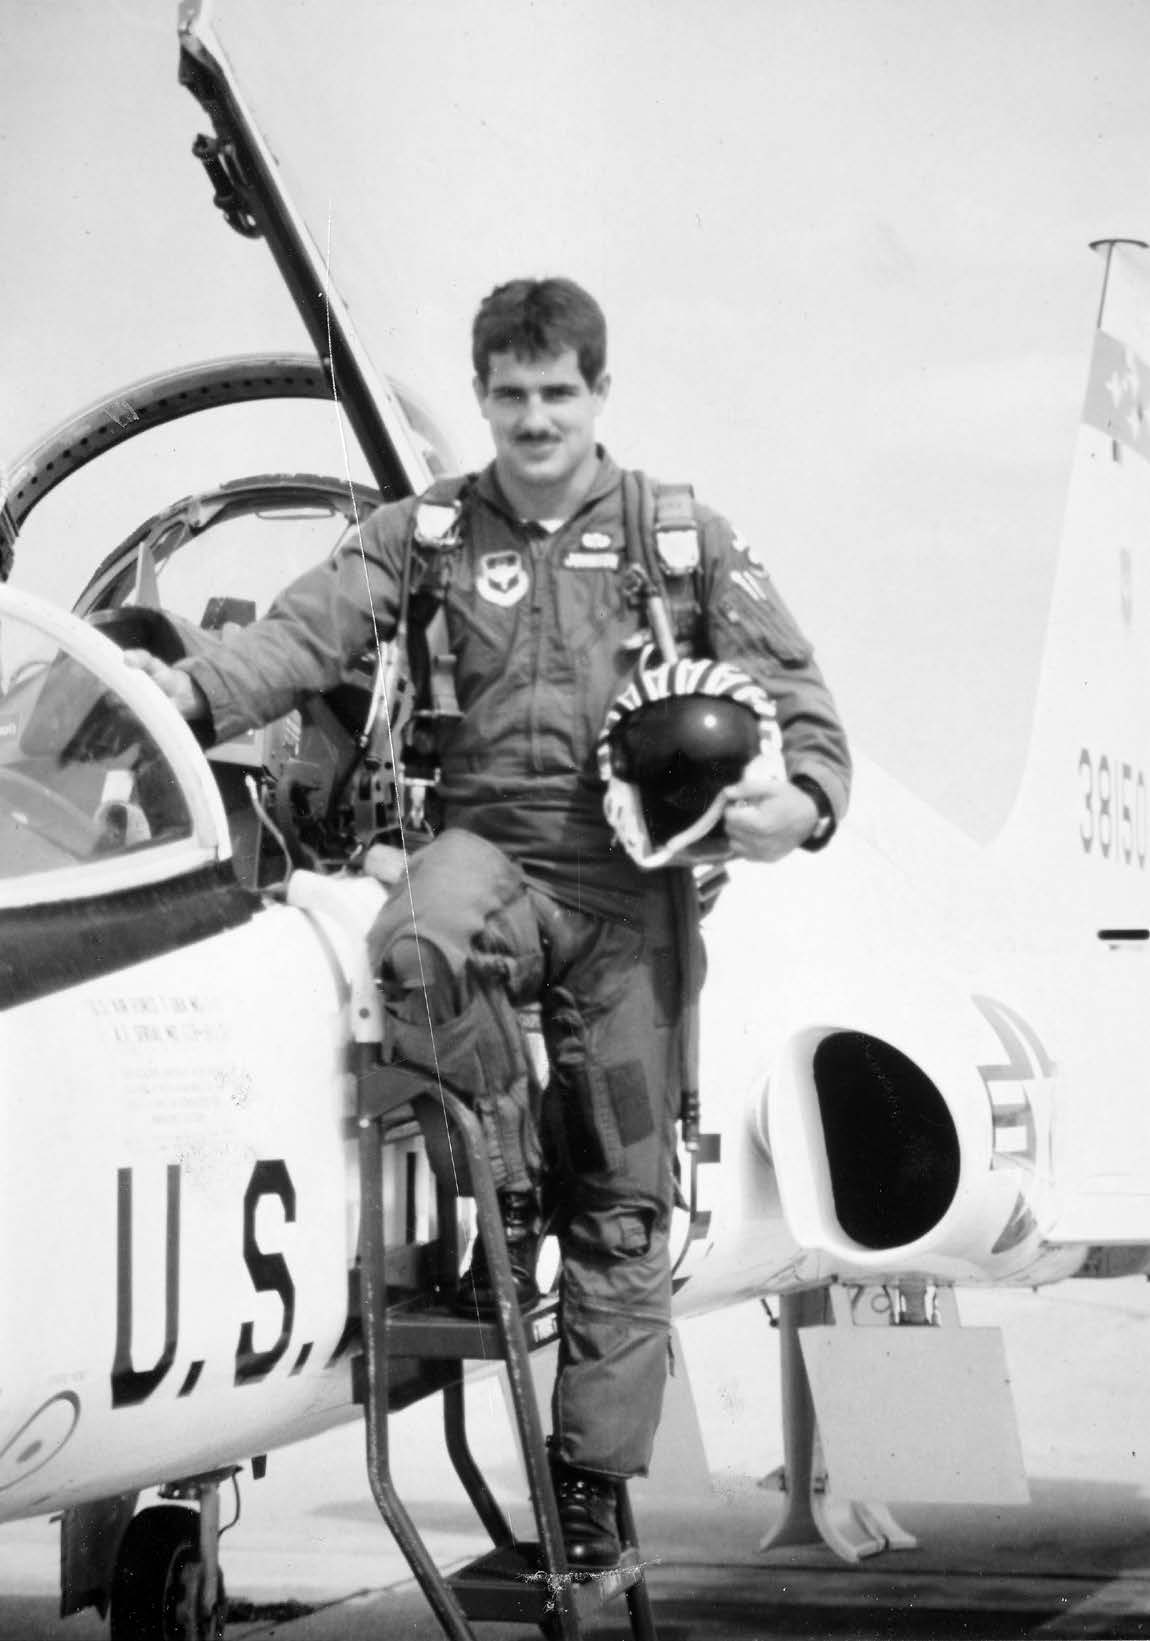 Second Lieutenant Brent Johnson’s initial U.S. Air Force pilot training on the T-38 Talon at Laughlin Air Force Base (AFB), Texas, in February 1985. Courtesy of Brent Johnson.